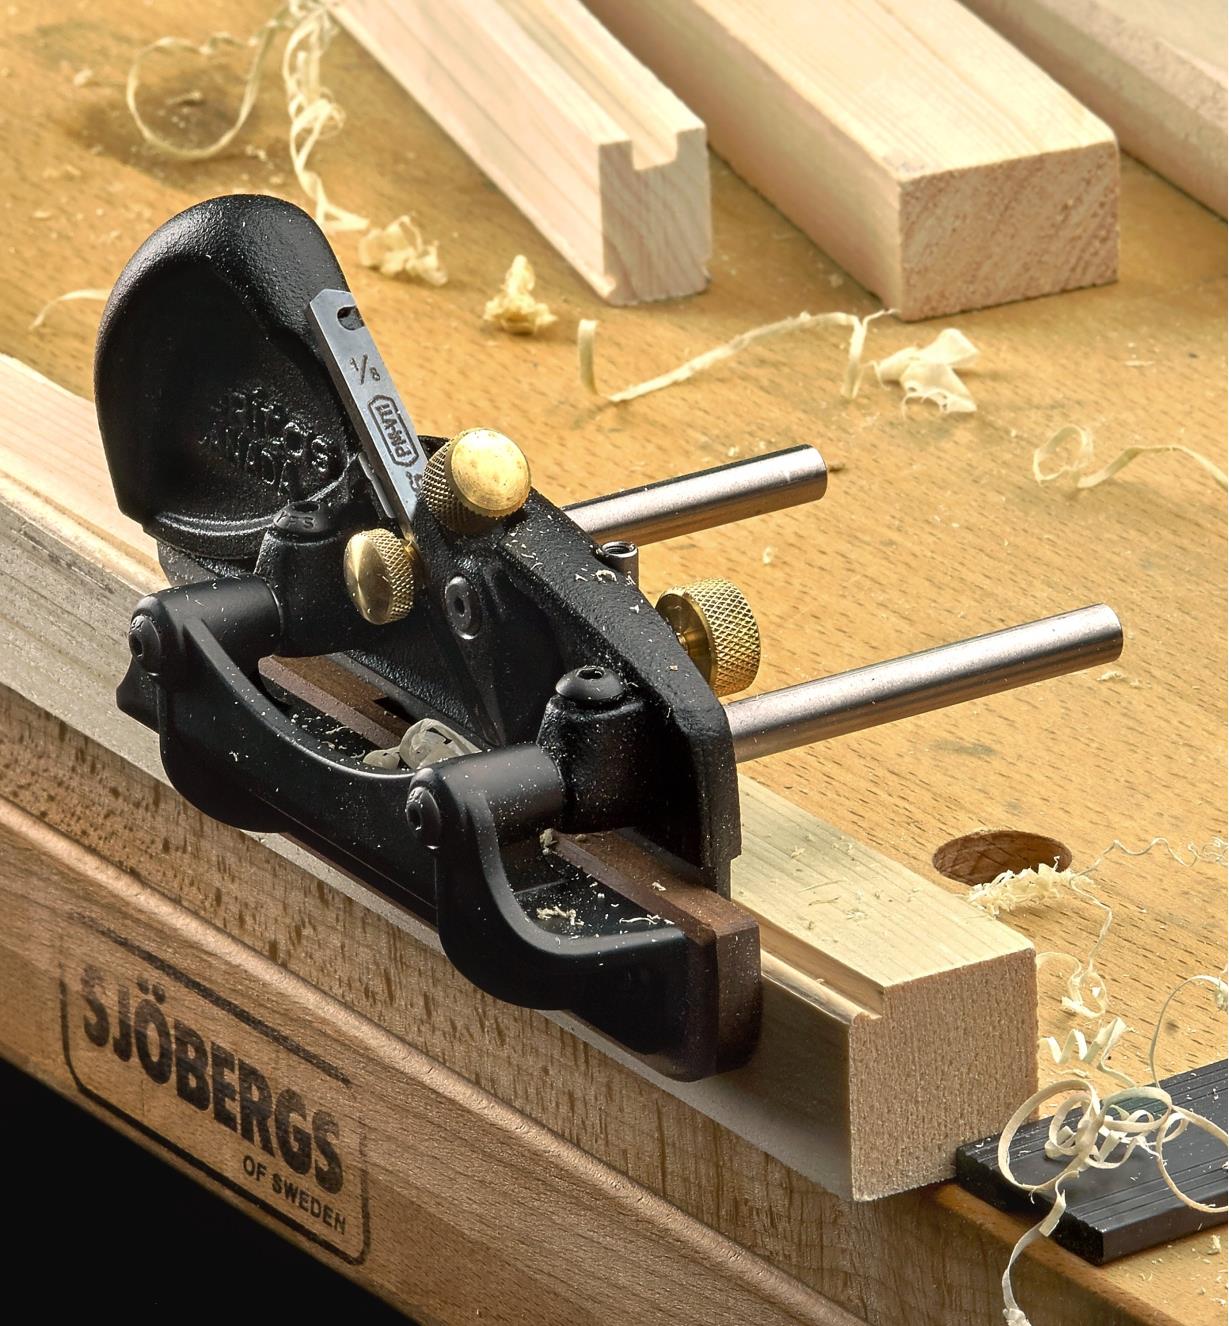 A left-hand box-maker’s plow plane being used to cut beading on the edge of a piece of wooden stock